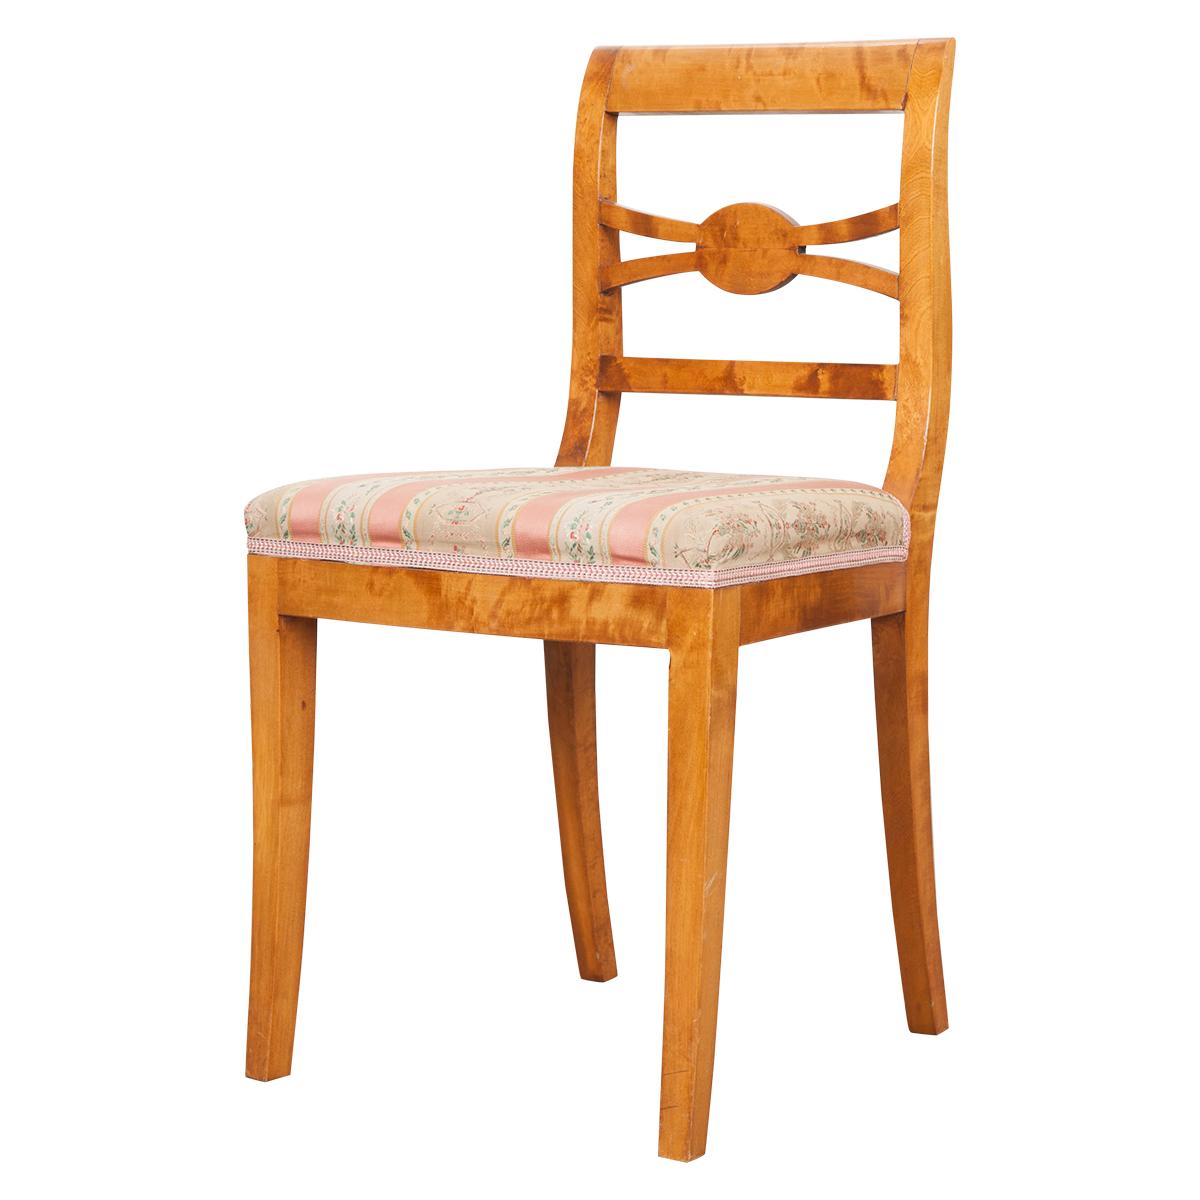 This gorgeous set of six Biedermeier side chairs, circa 1830, are from Germany and retain their original floral striped upholstery. They feature gently sloping lines and geometric chair backs typical of the style. Diminutive in stature, these dining